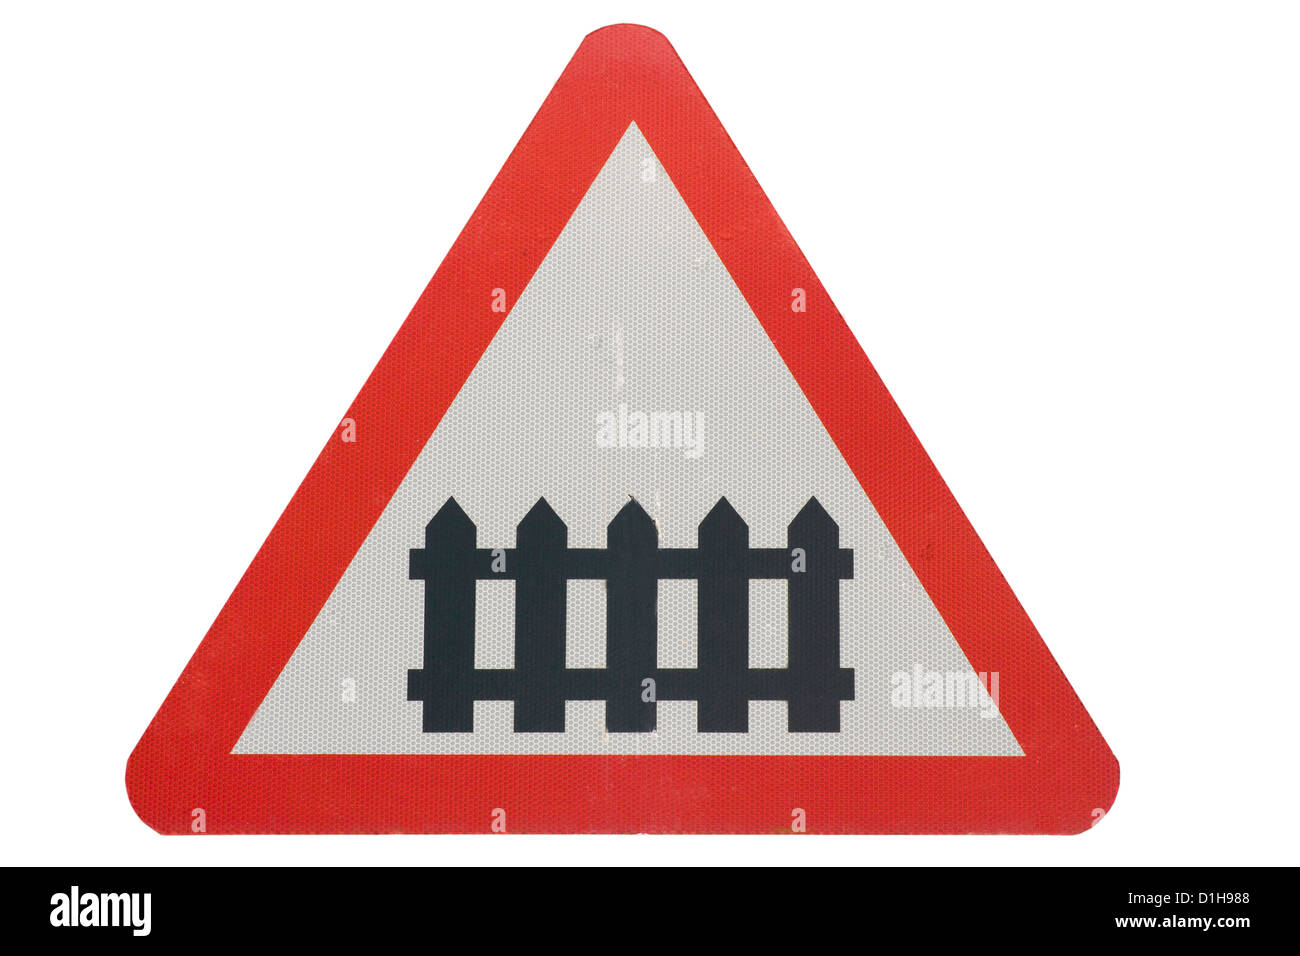 Level Crossing Road Sign Stock Photo Alamy